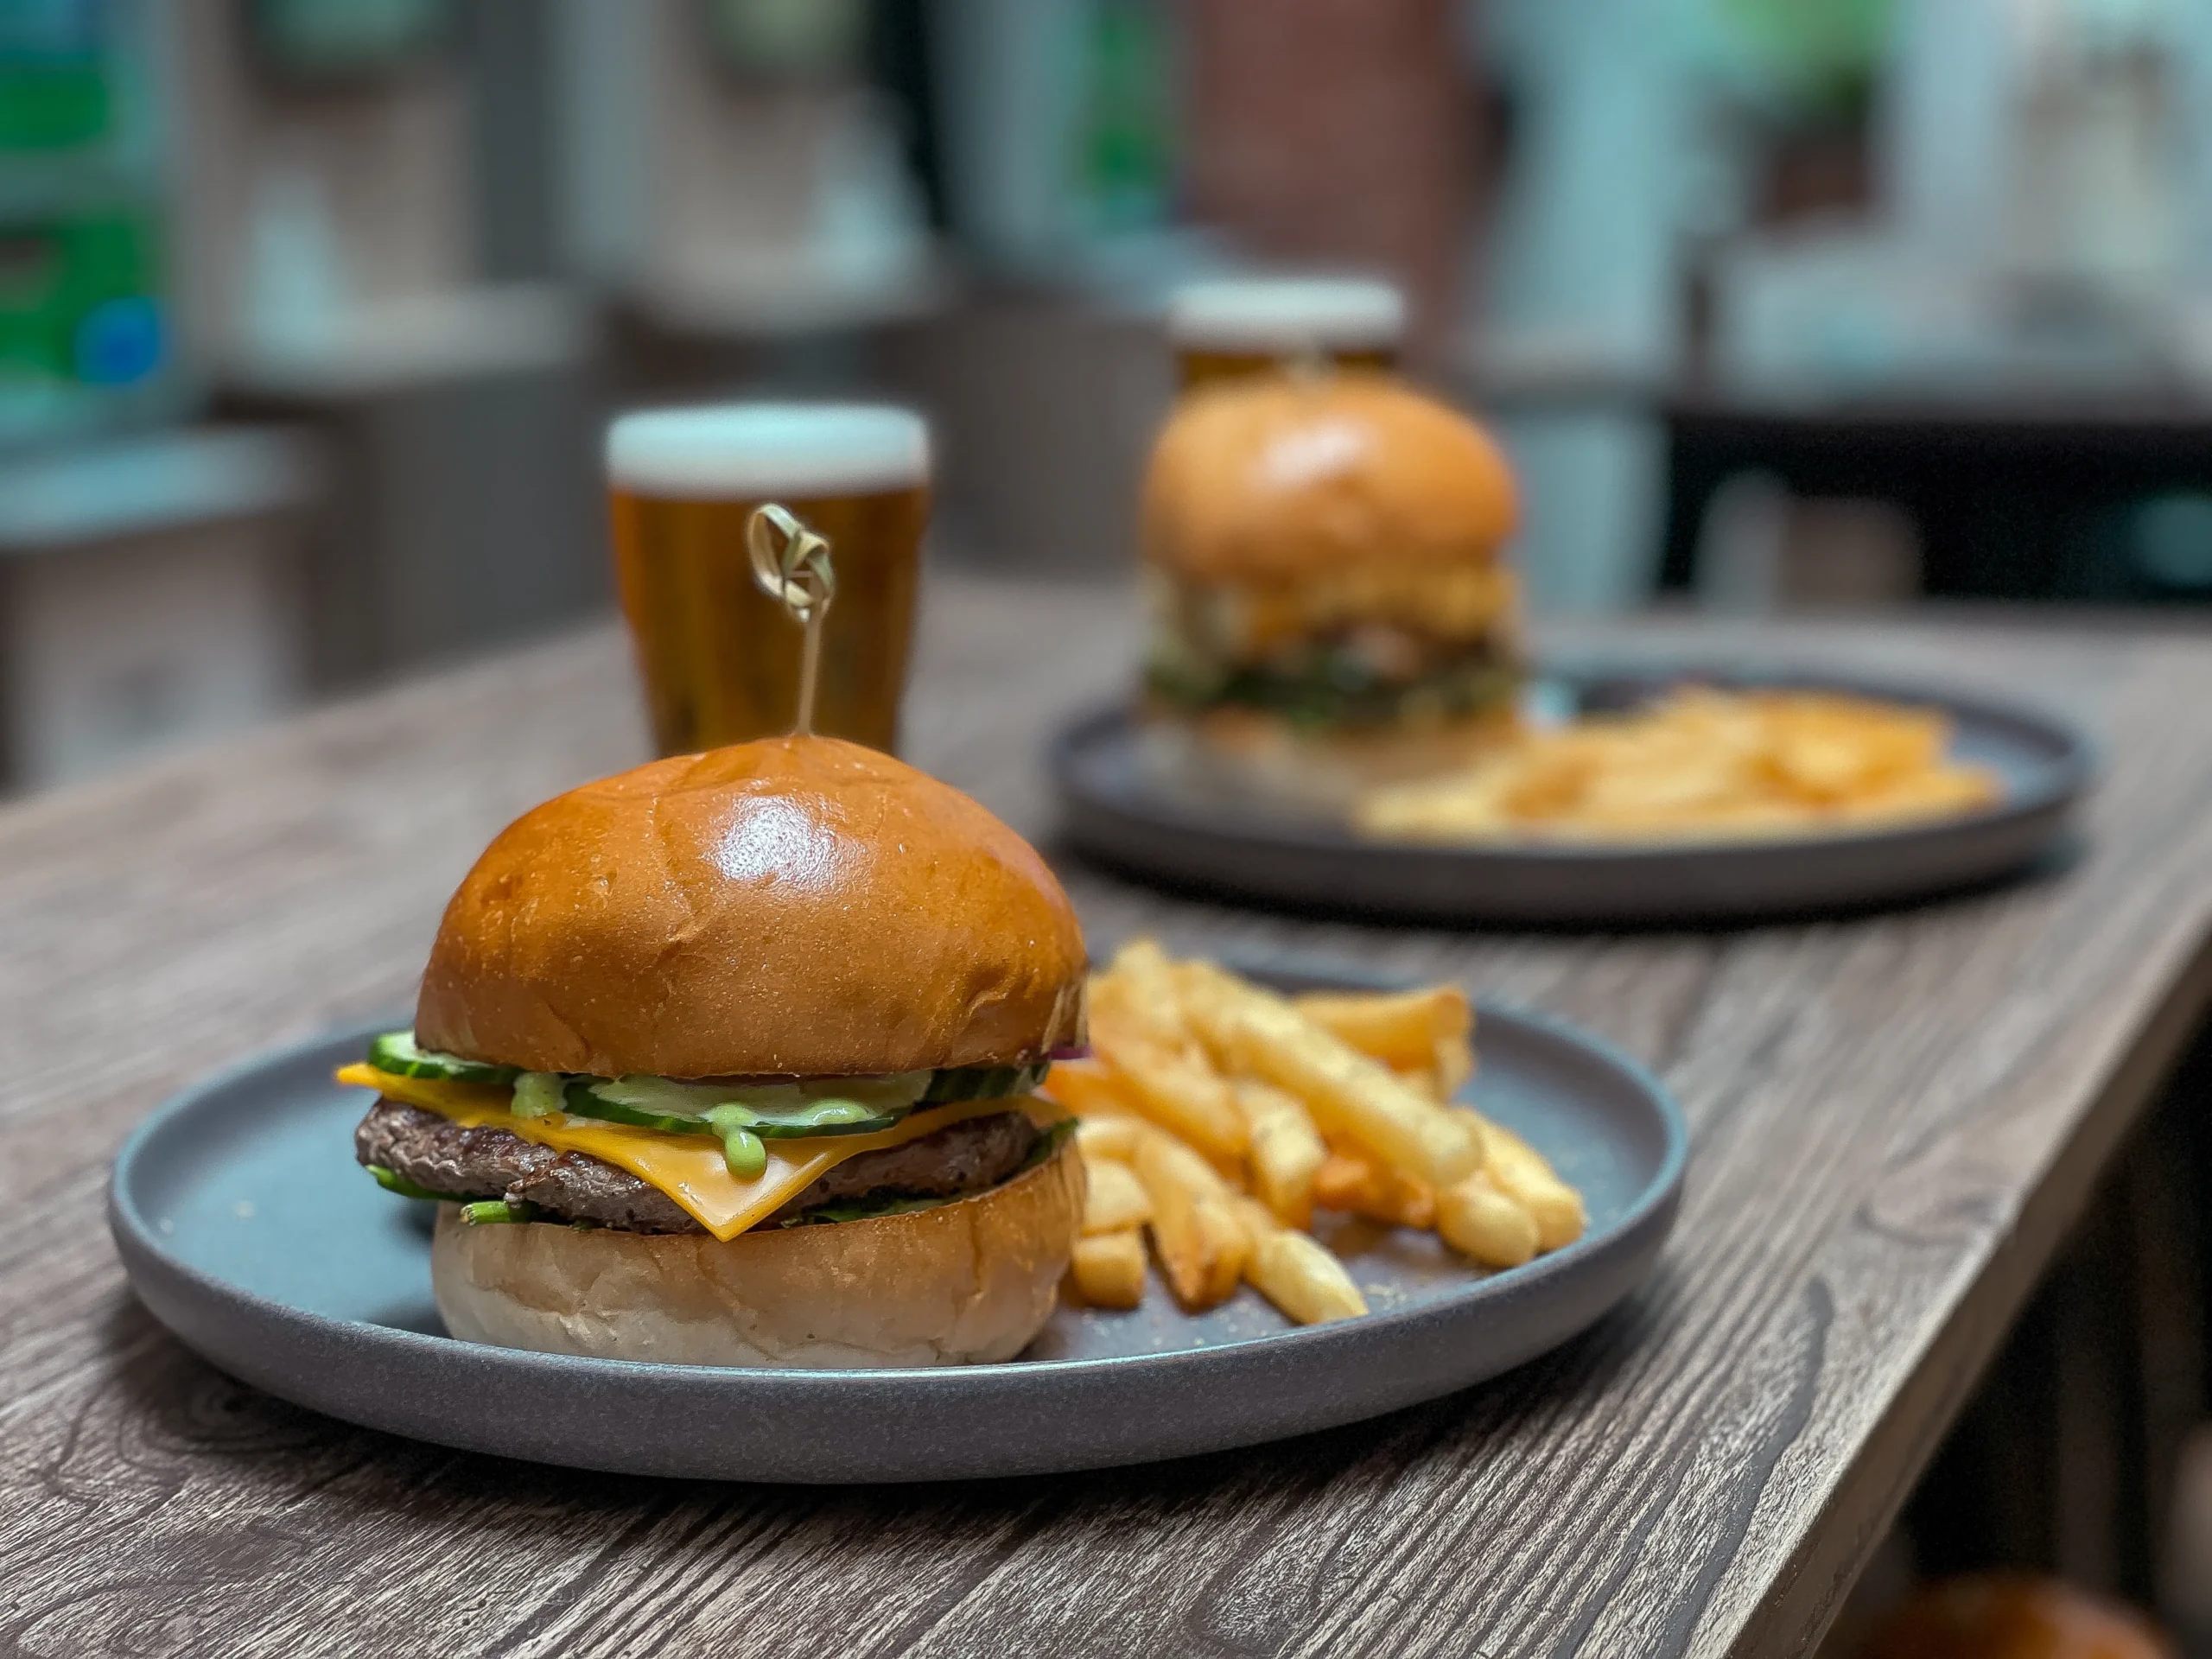 The King Hotel $25 Burger & Beer Tuesday